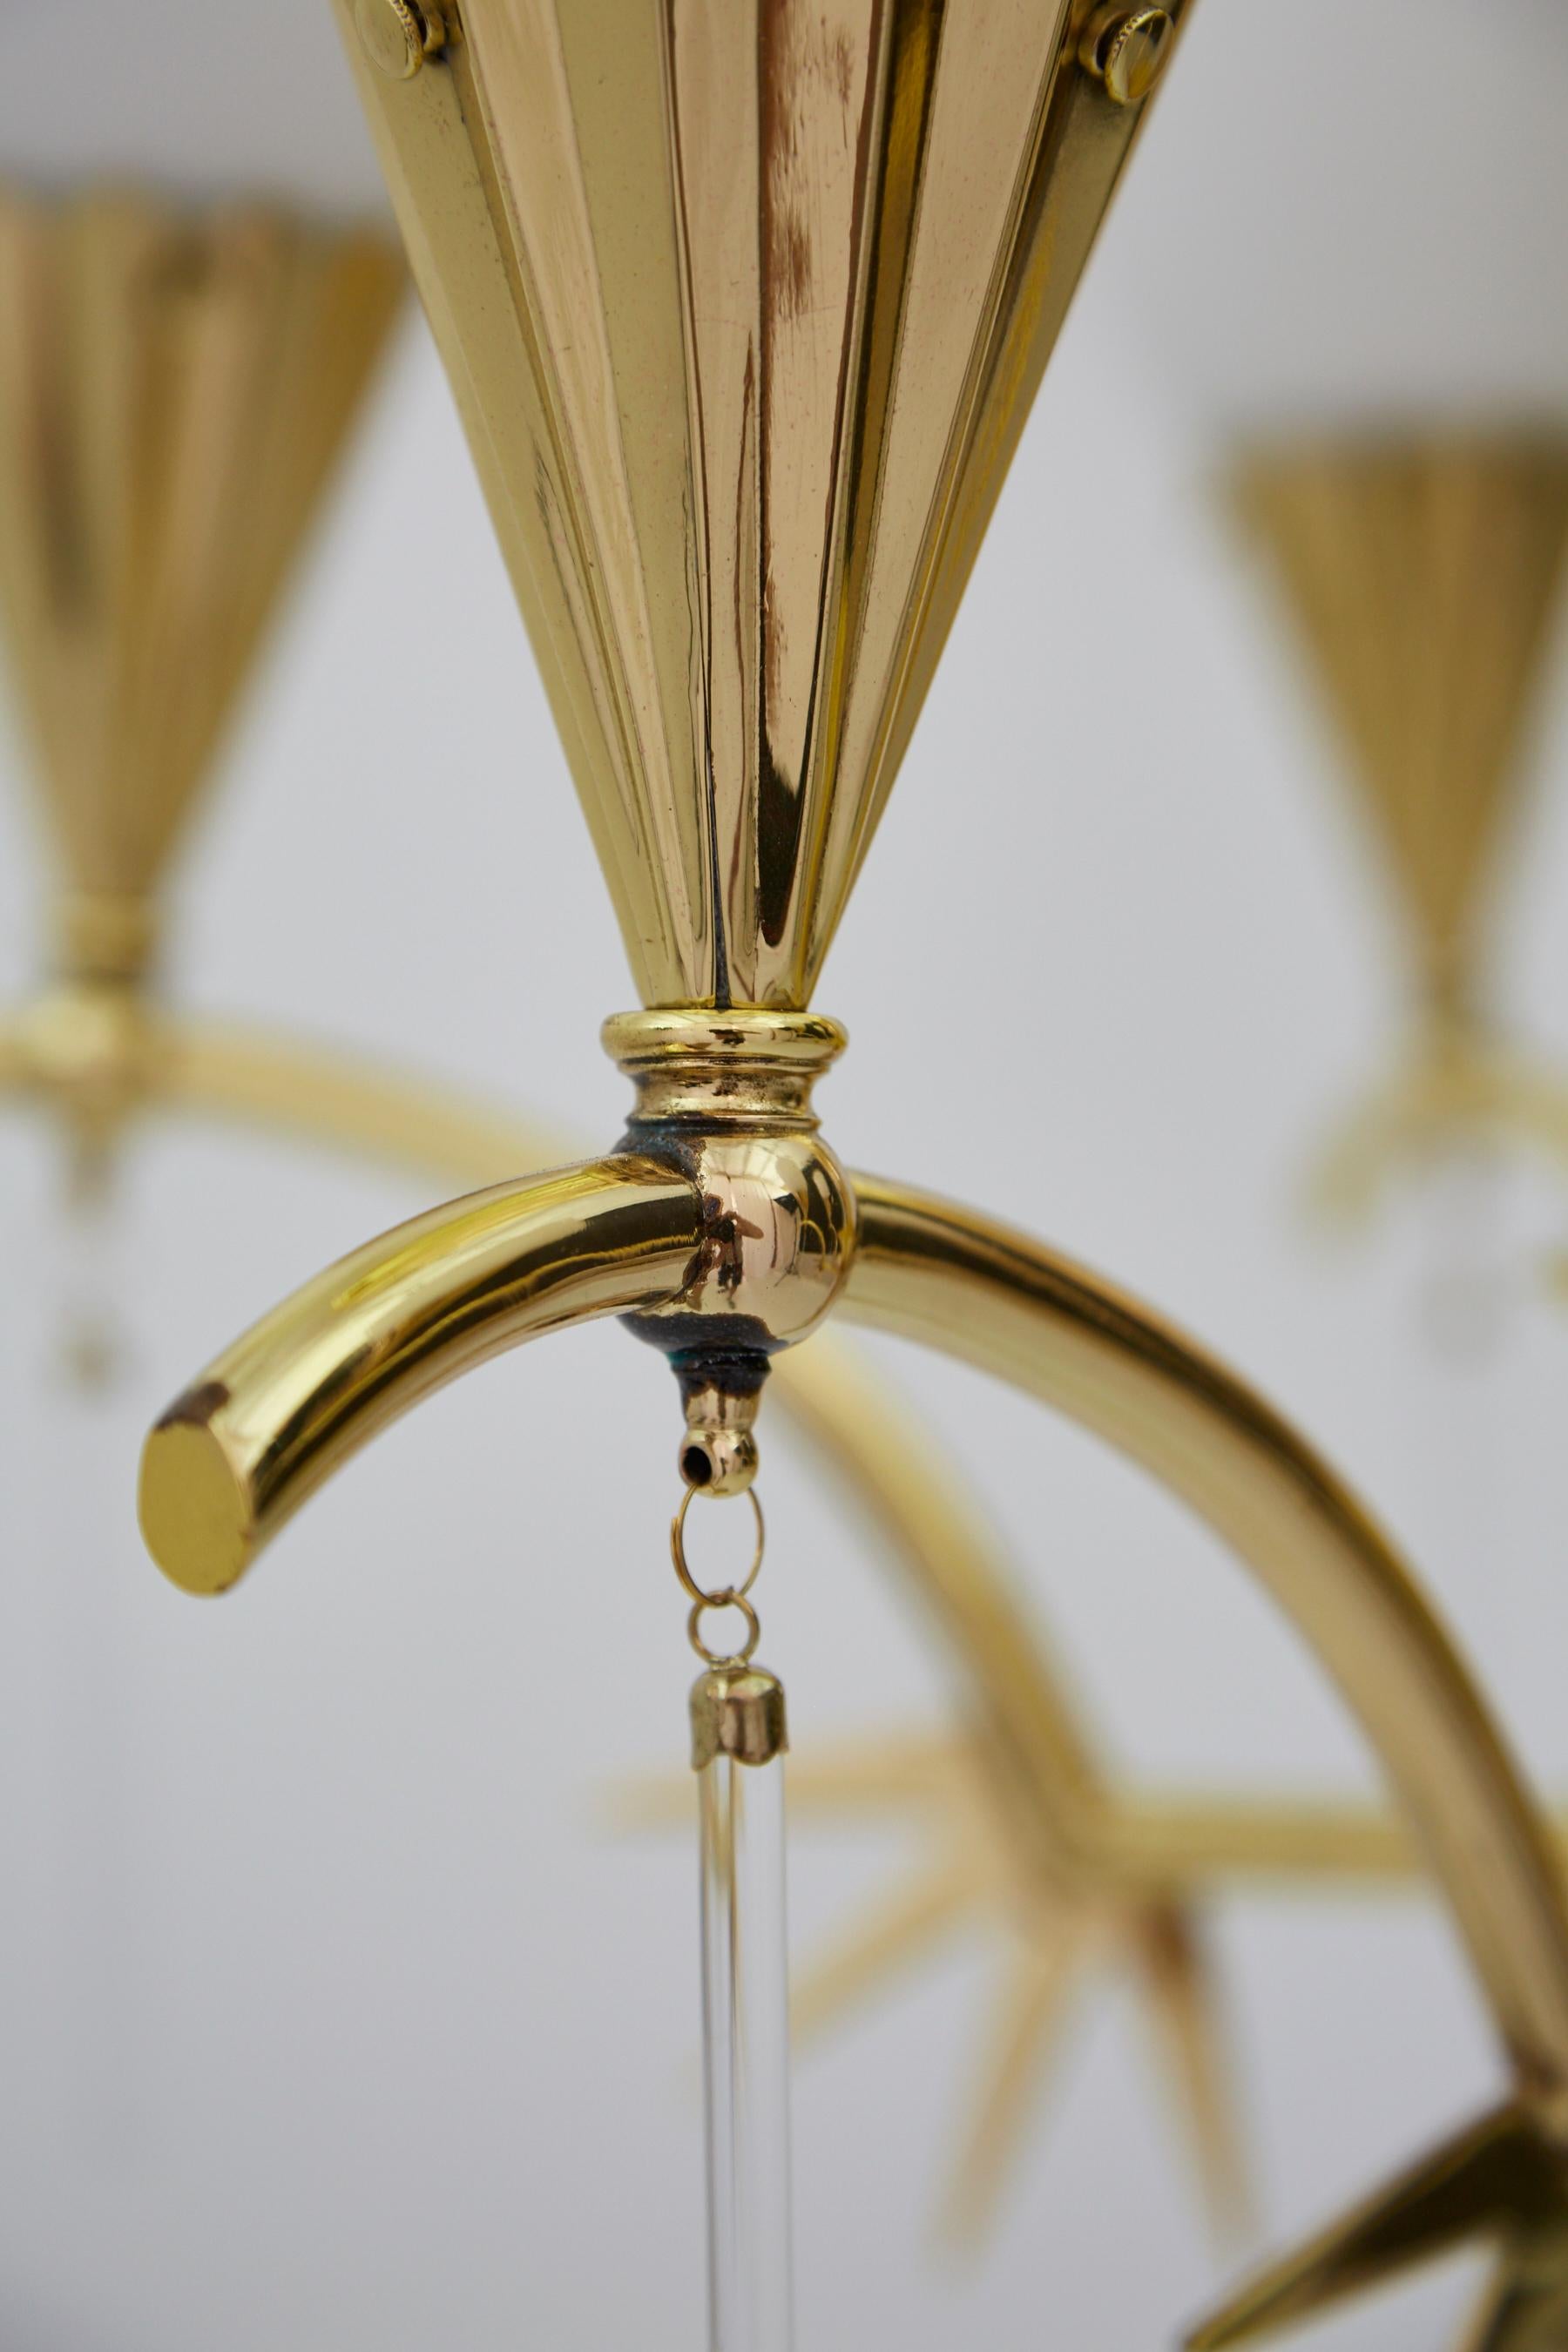 Six-Arm Italian Brass Chandelier with Decorative Spikes, 1940s In Good Condition For Sale In Los Angeles, CA